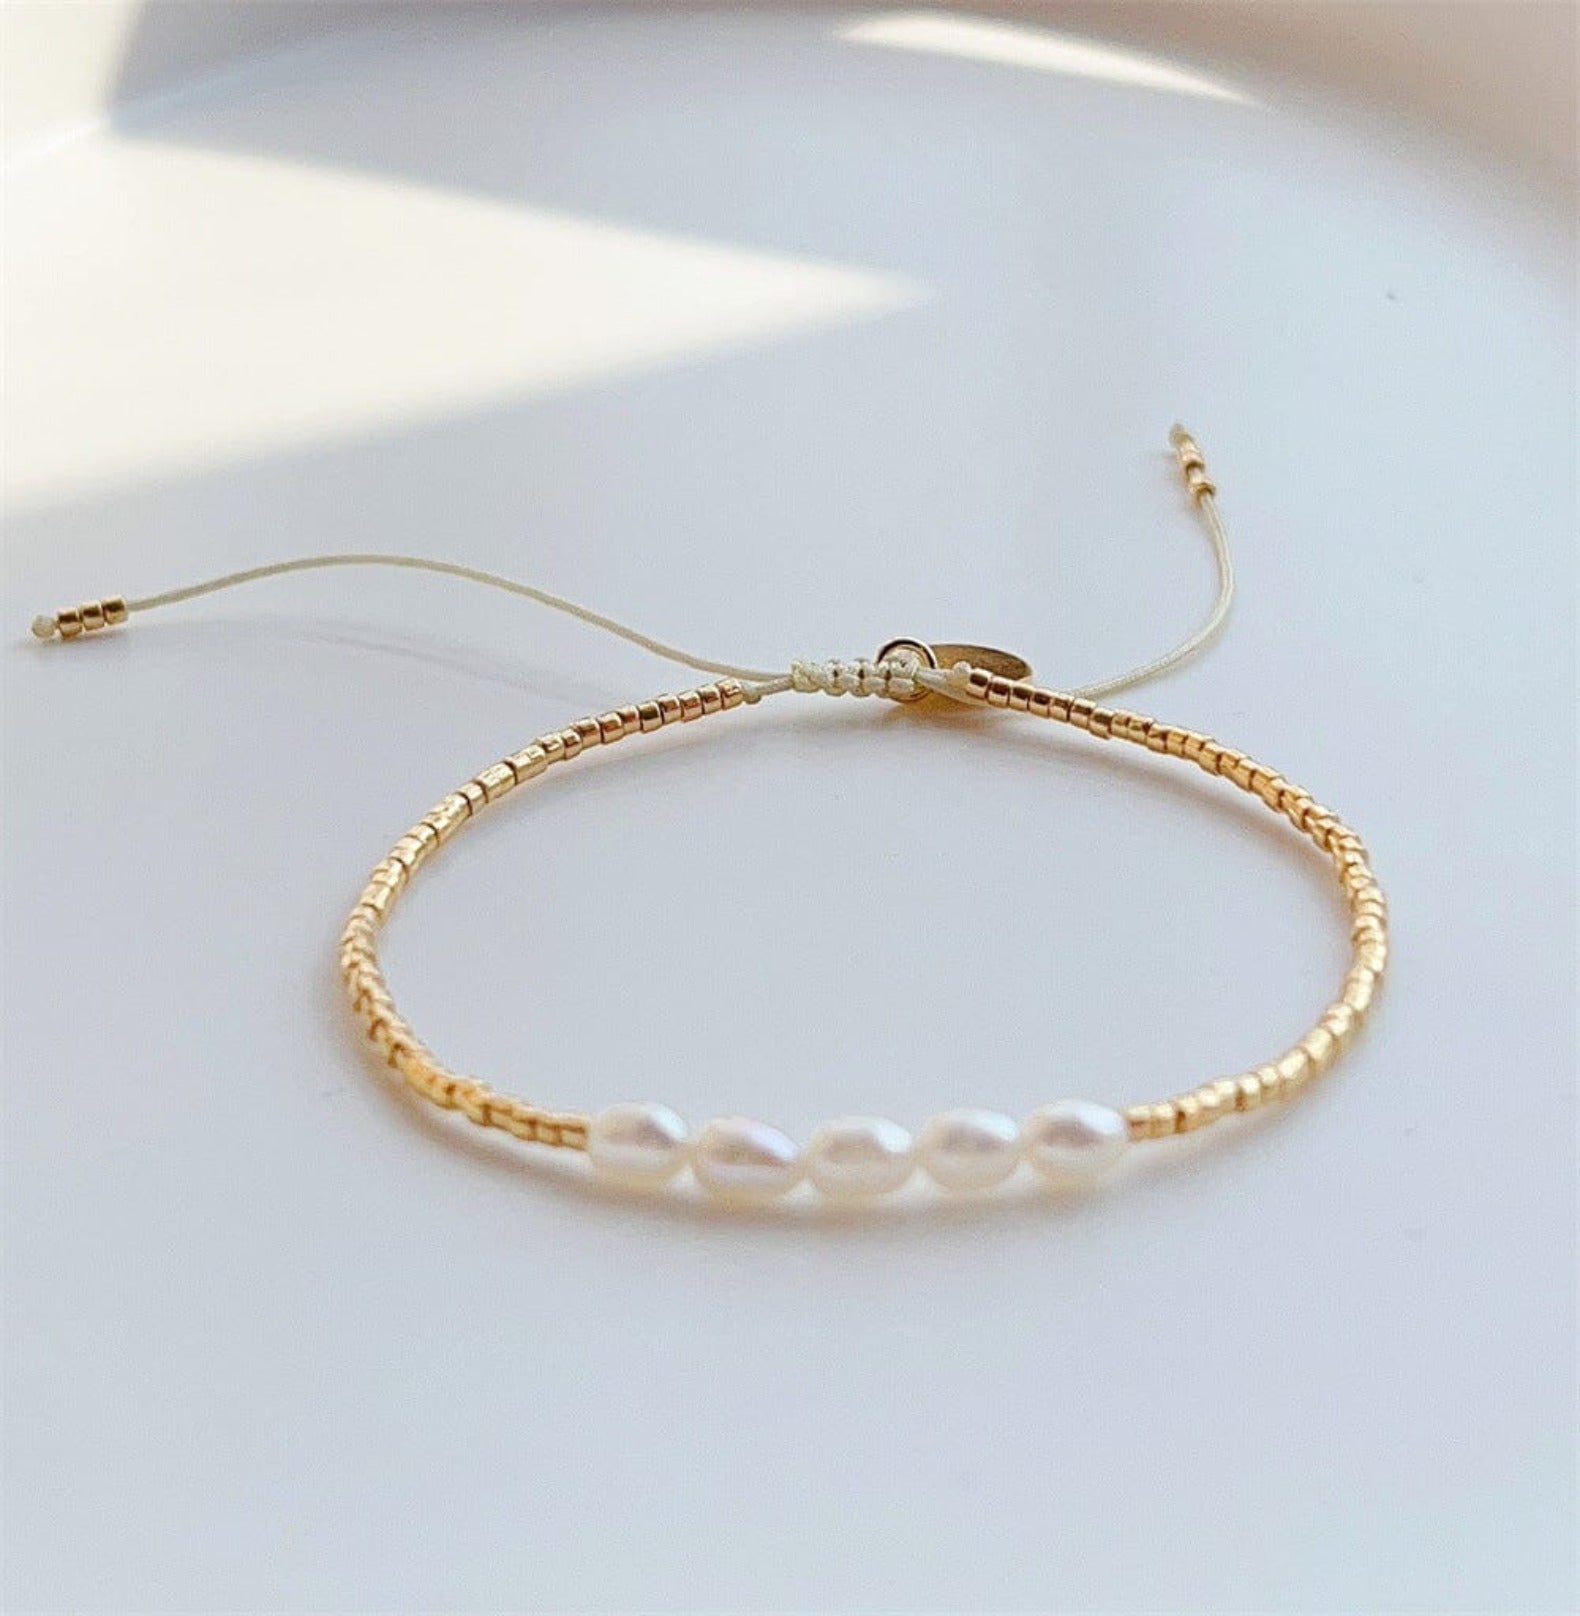 ??????Bracelet Gold Beads Natural Pearl braclet Yubama Jewelry Online Store - The Elegant Designs of Gold and Silver ! 